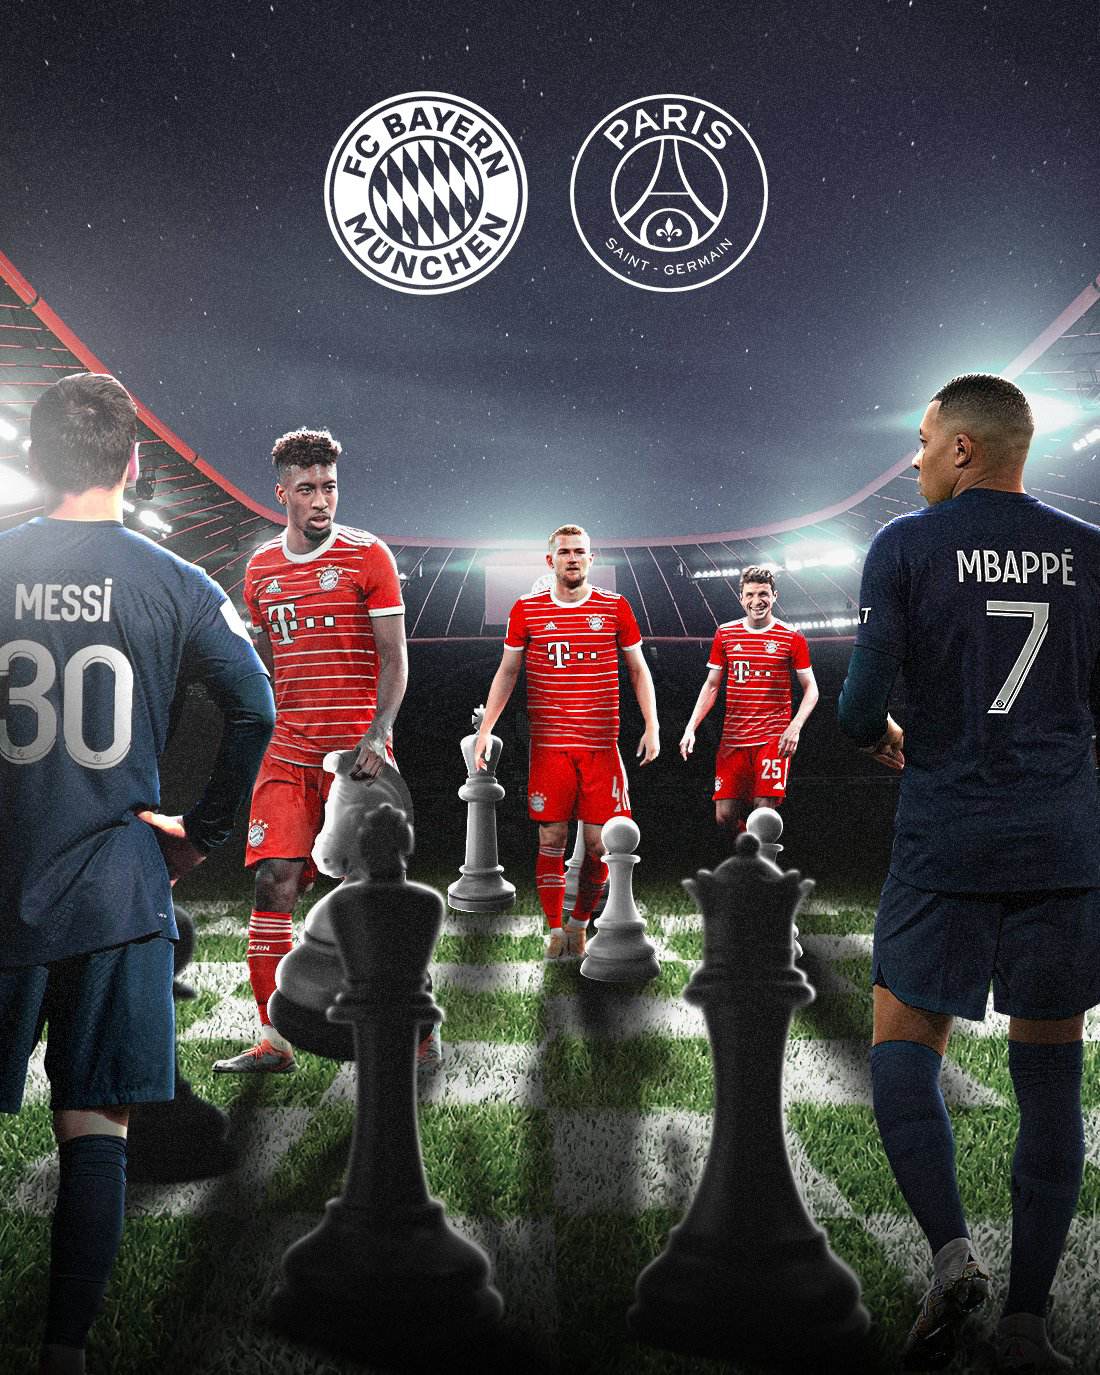 What did Bayern Munich and Paris Saint-Germain do in the Champions League group stage?